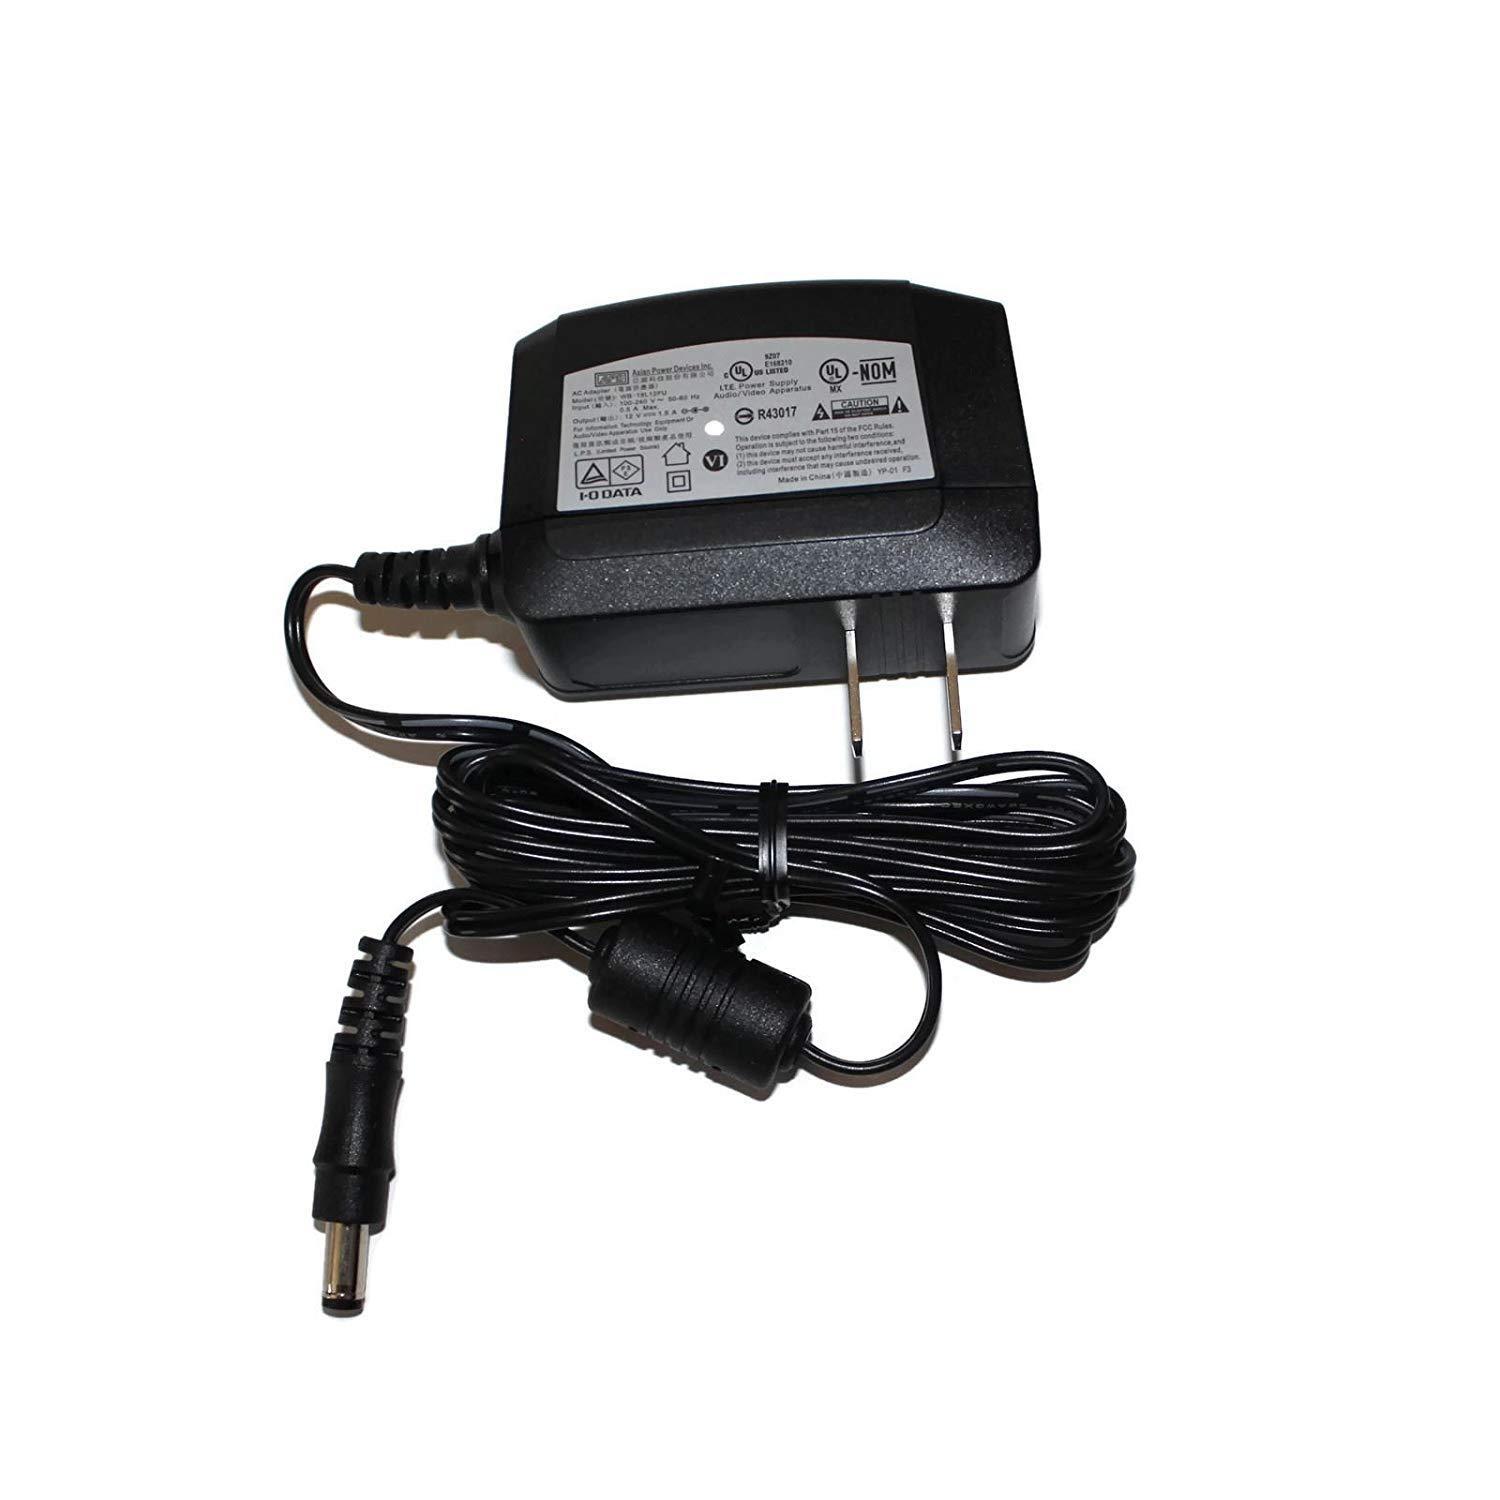 *Brand NEW* APD 12V 1.5A AC Adapter 120-240V 50-60Hz for WD / Seagate HDD WB-18L12FU POWER Supply